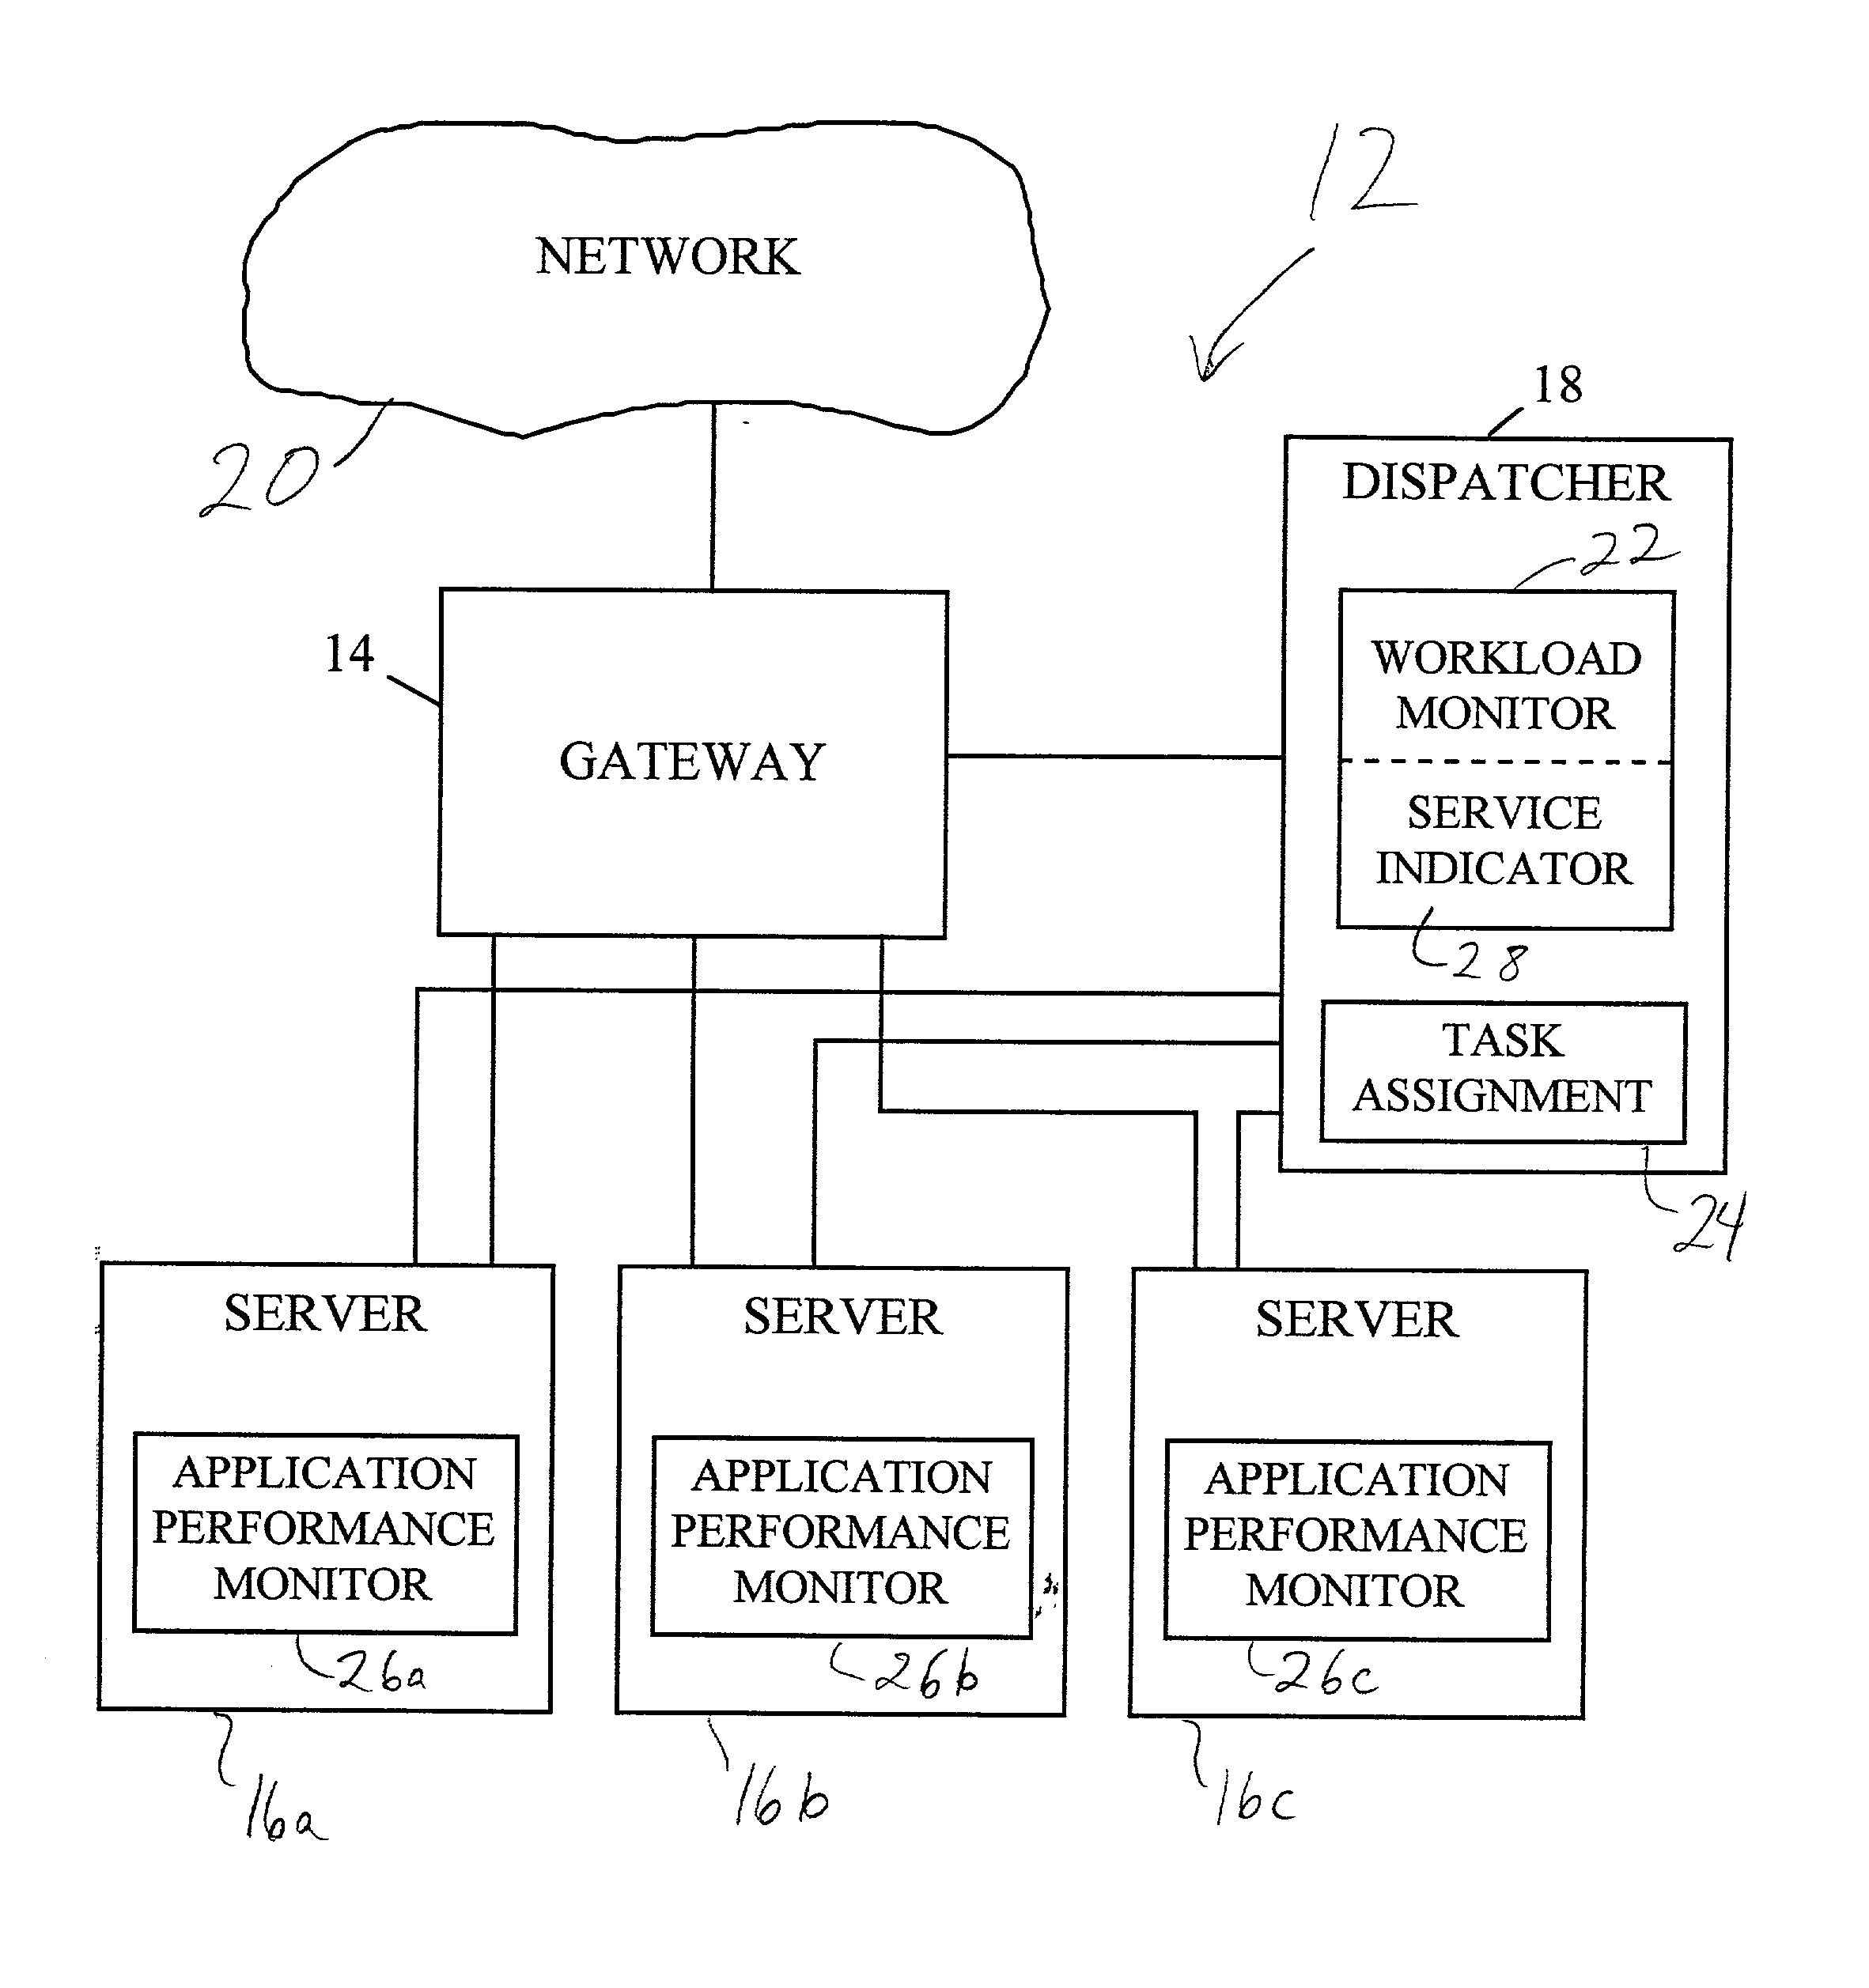 System and method for reliability-based load balancing and dispatching using software rejuvenation